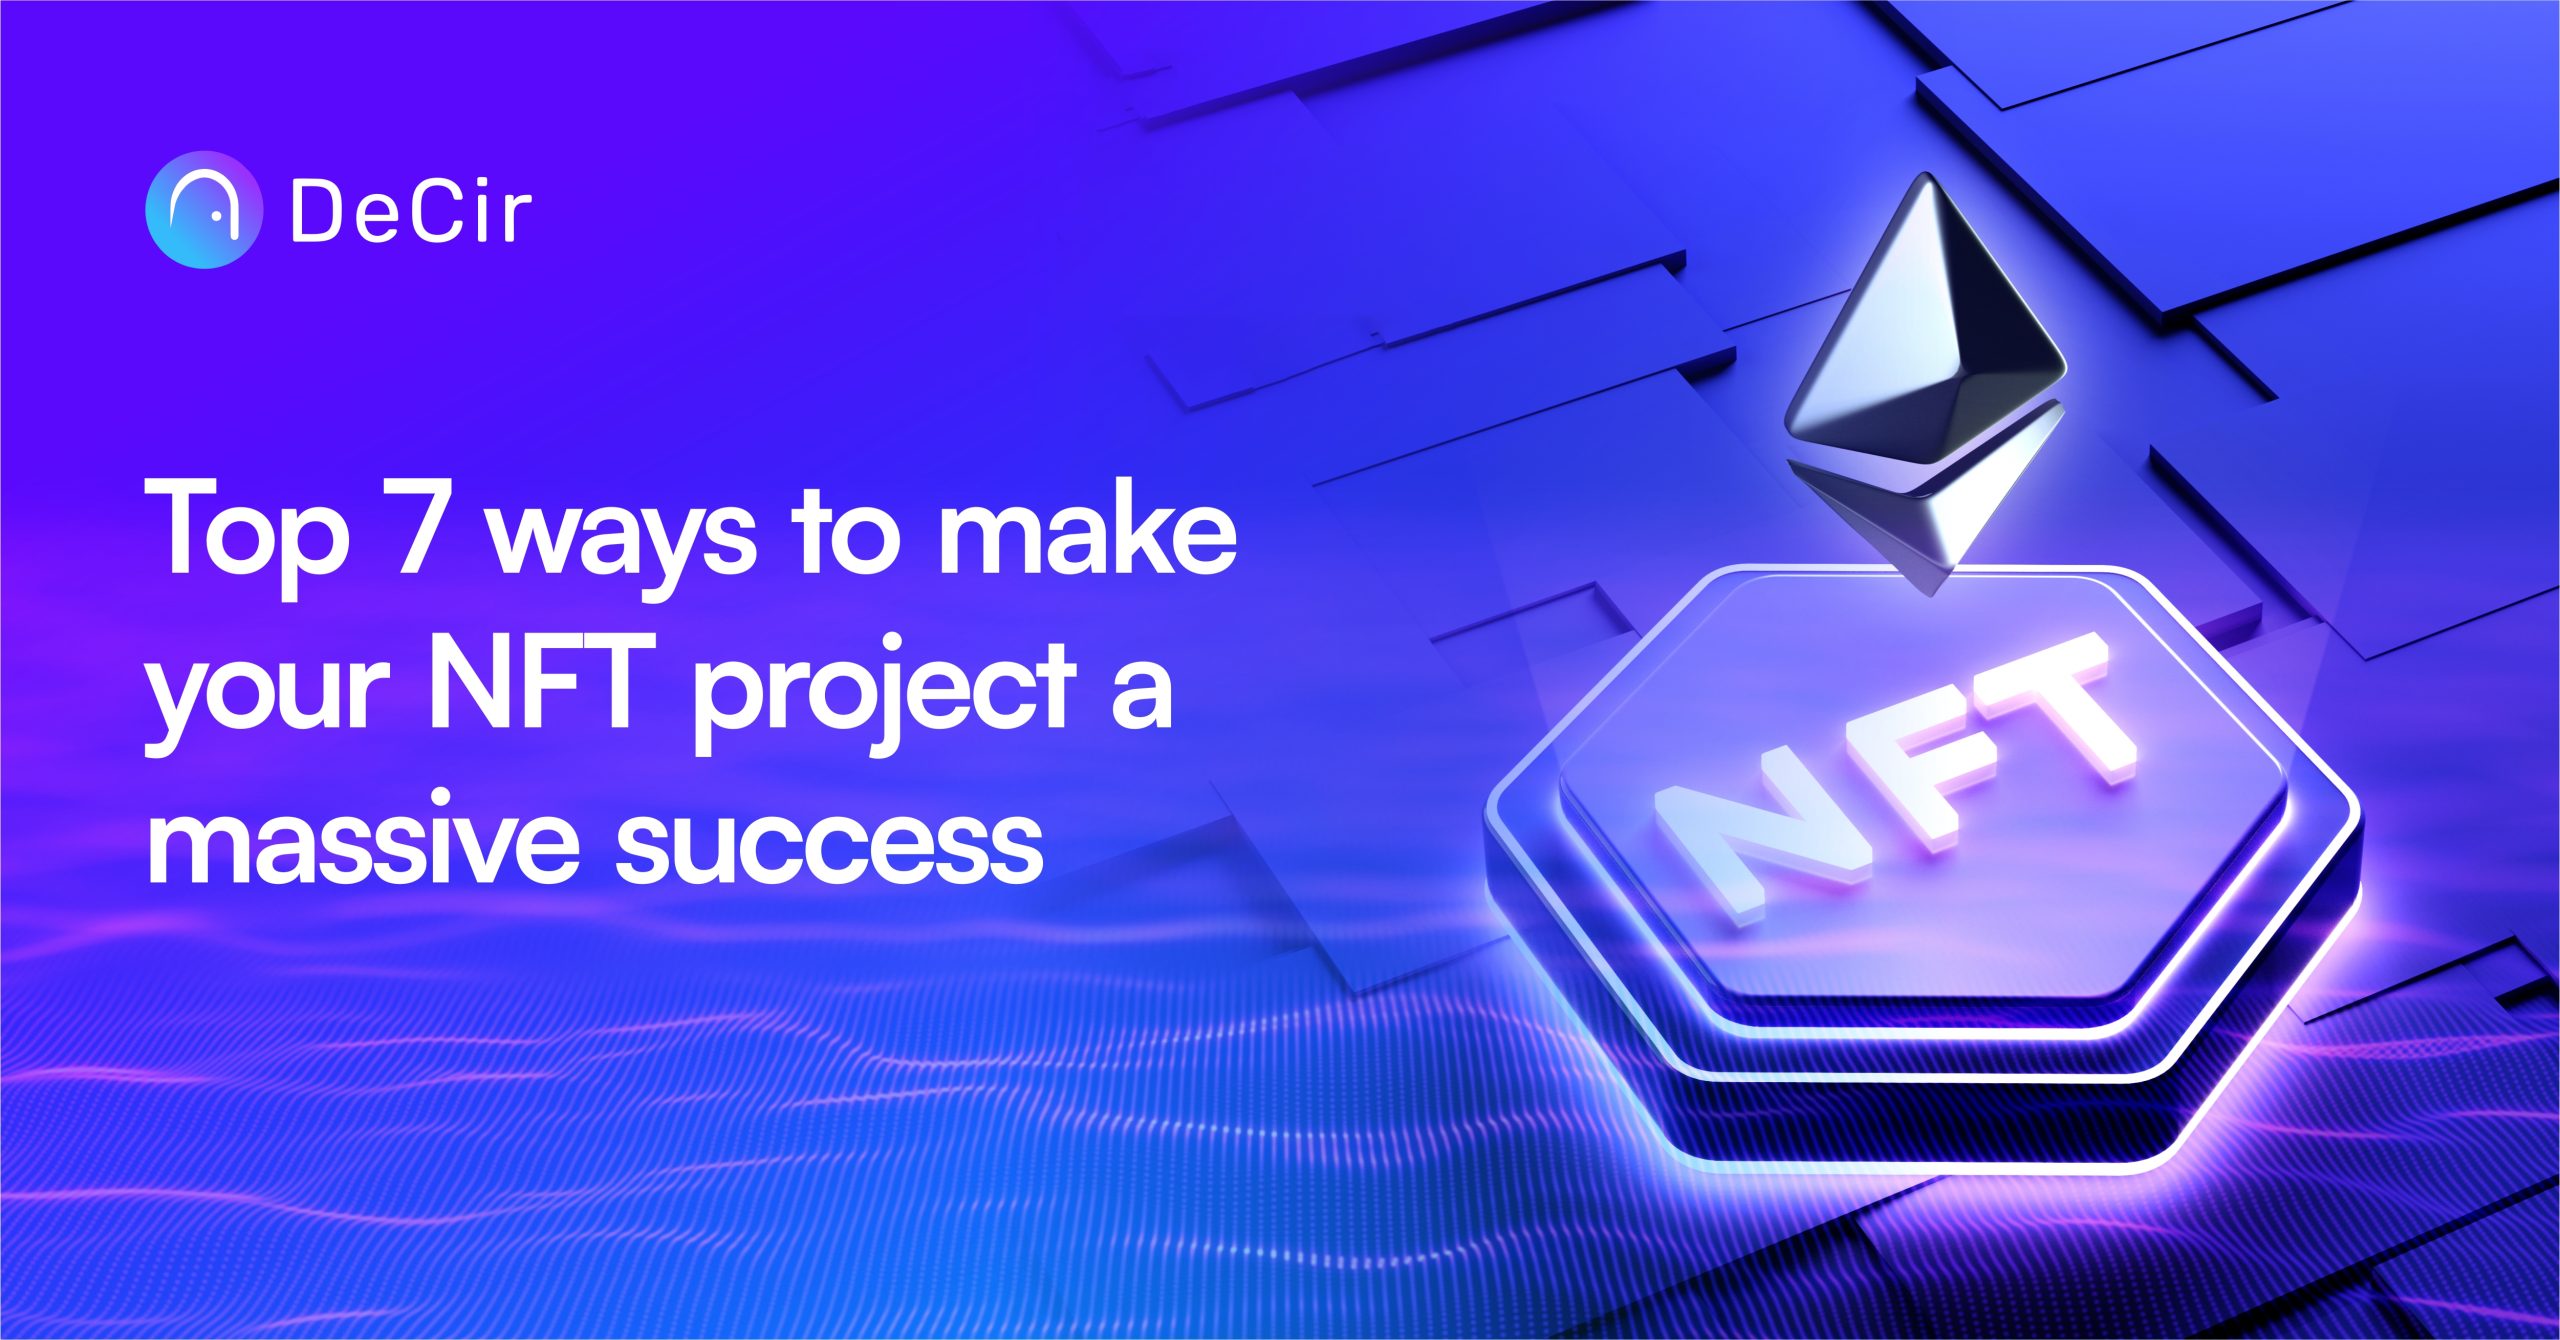 Top 7 ways to make your NFT project a massive success